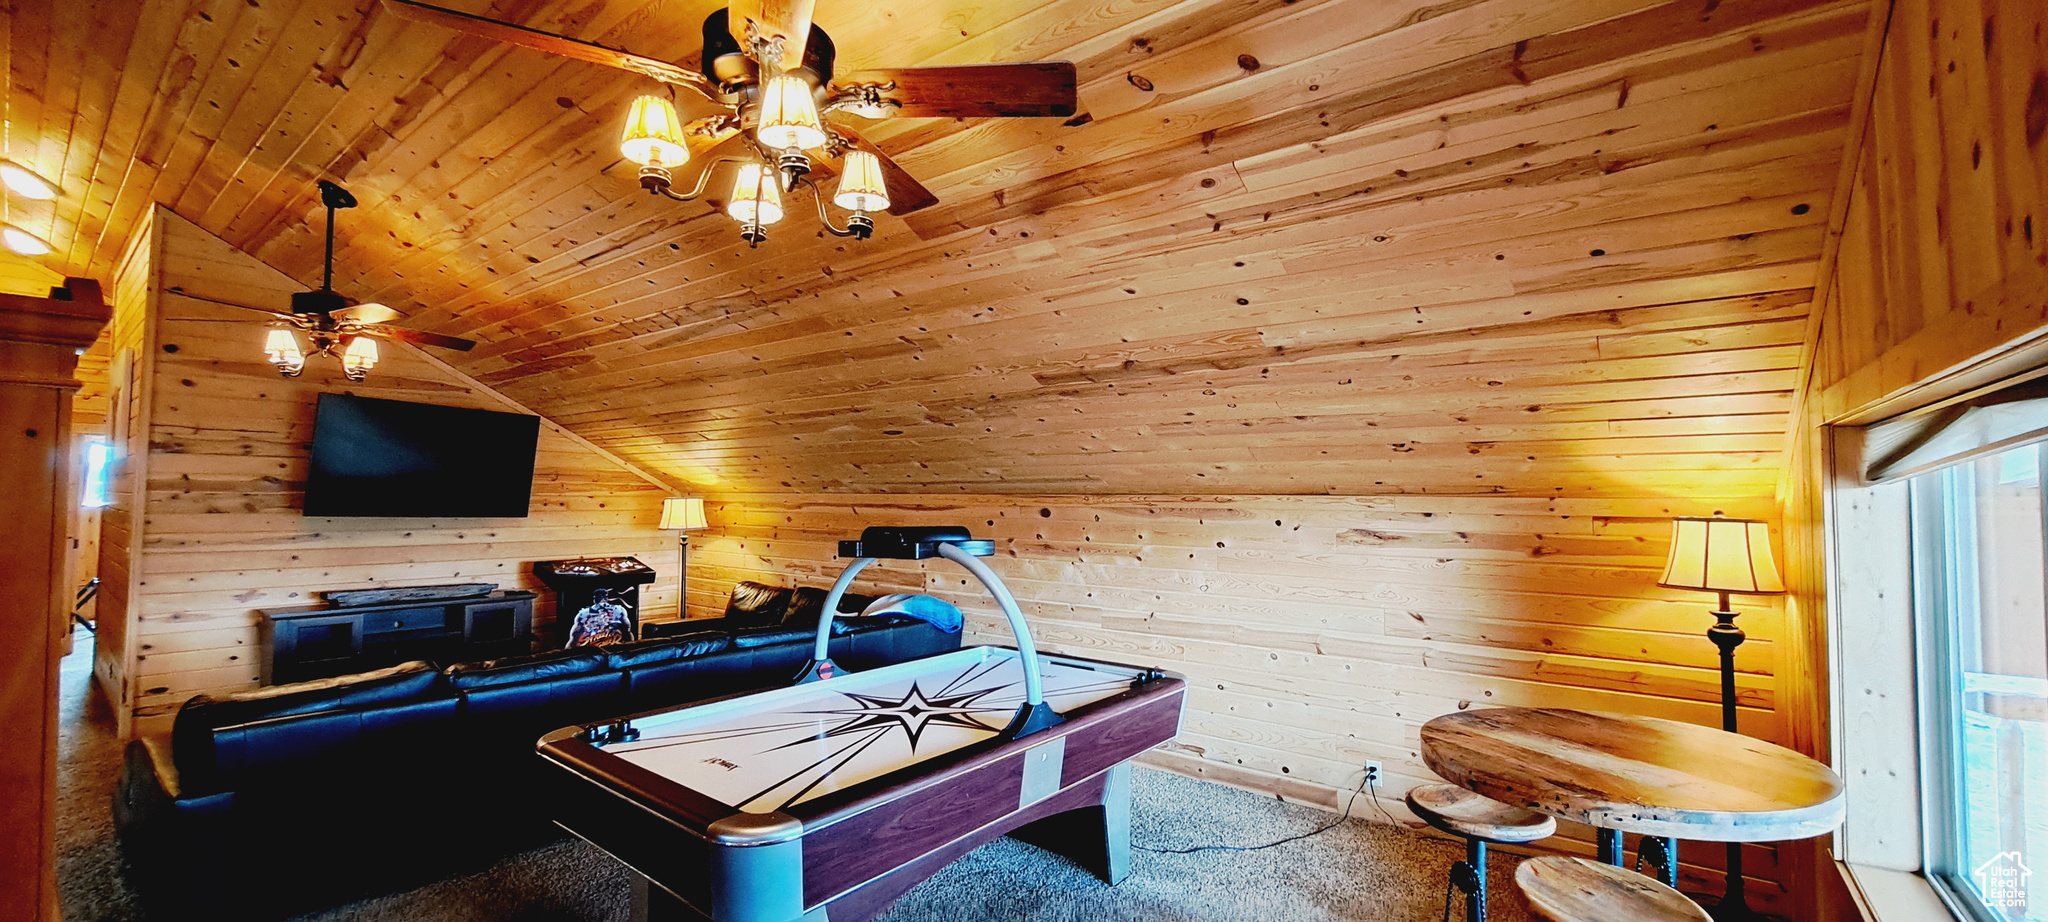 Rec room featuring ceiling fan, lofted ceiling, wooden walls, wood ceiling, and carpet